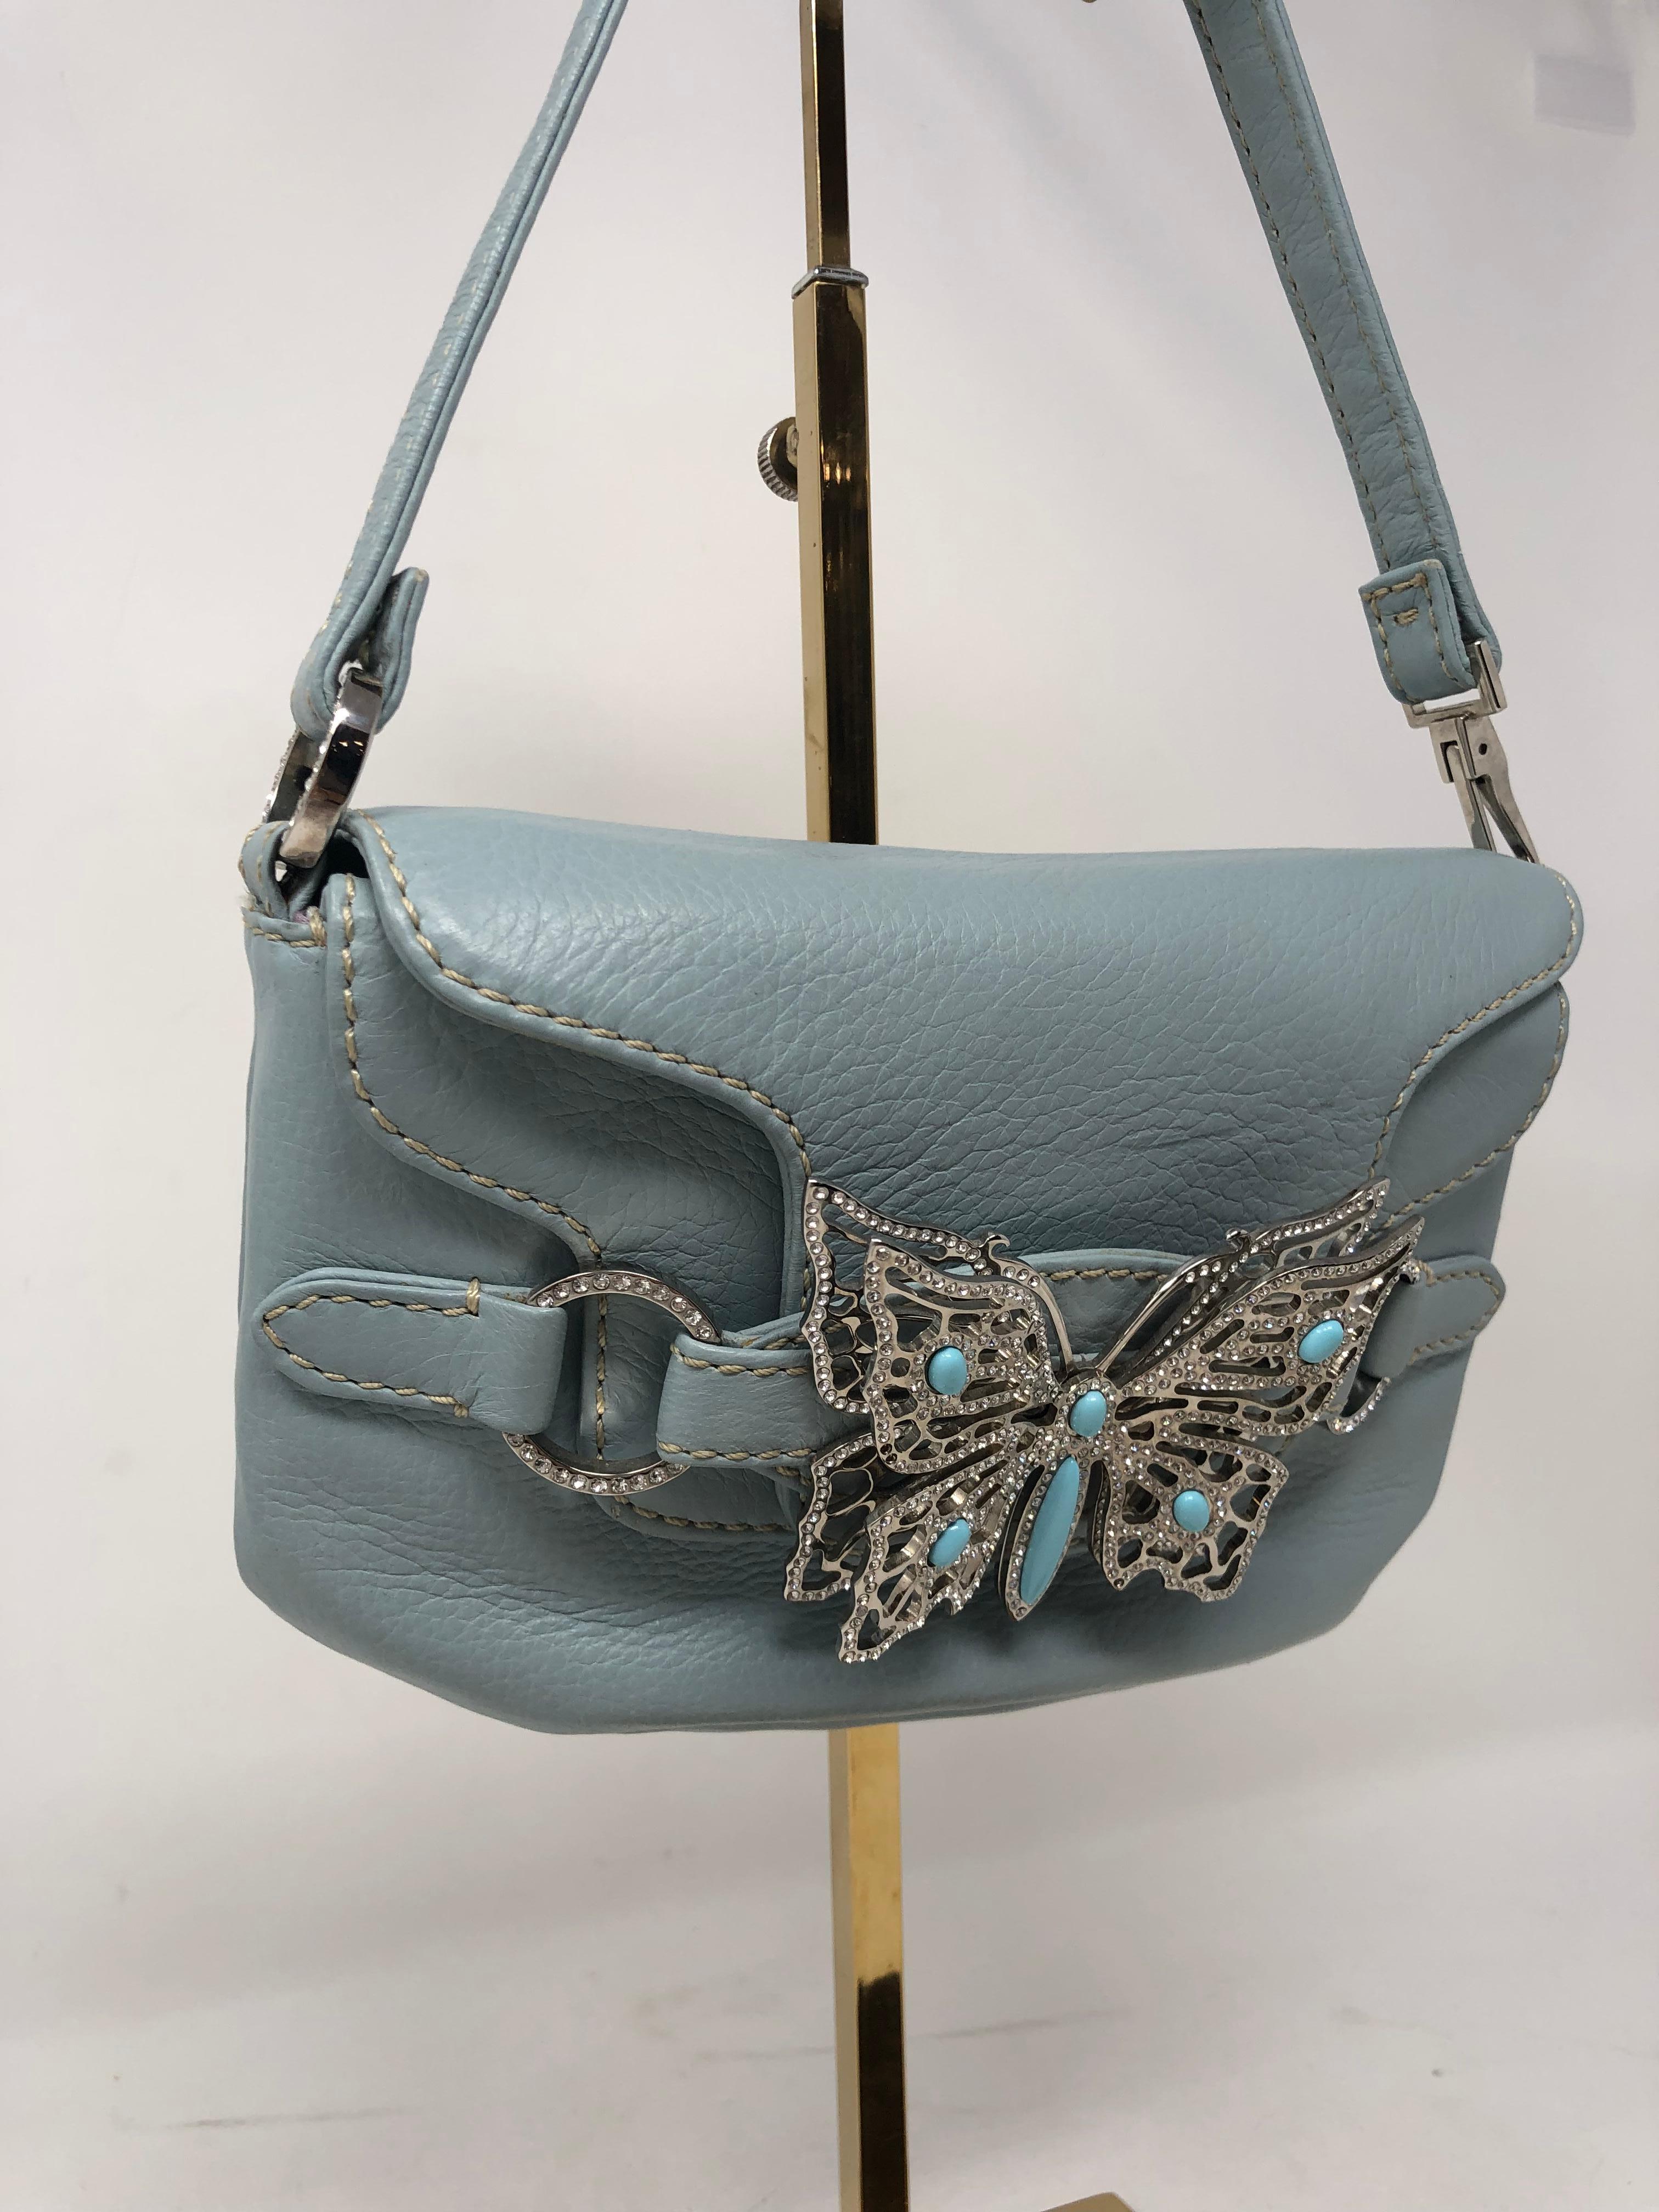 Valentino Mini Bag with Butterfly details. Stunning Butterfly with turqoise beads inlaid with rhinestones. Mint condition. Sweet little evening bag in all soft blue leather. Rare and limited bag. Make a statement any where you go. Classic Valentino